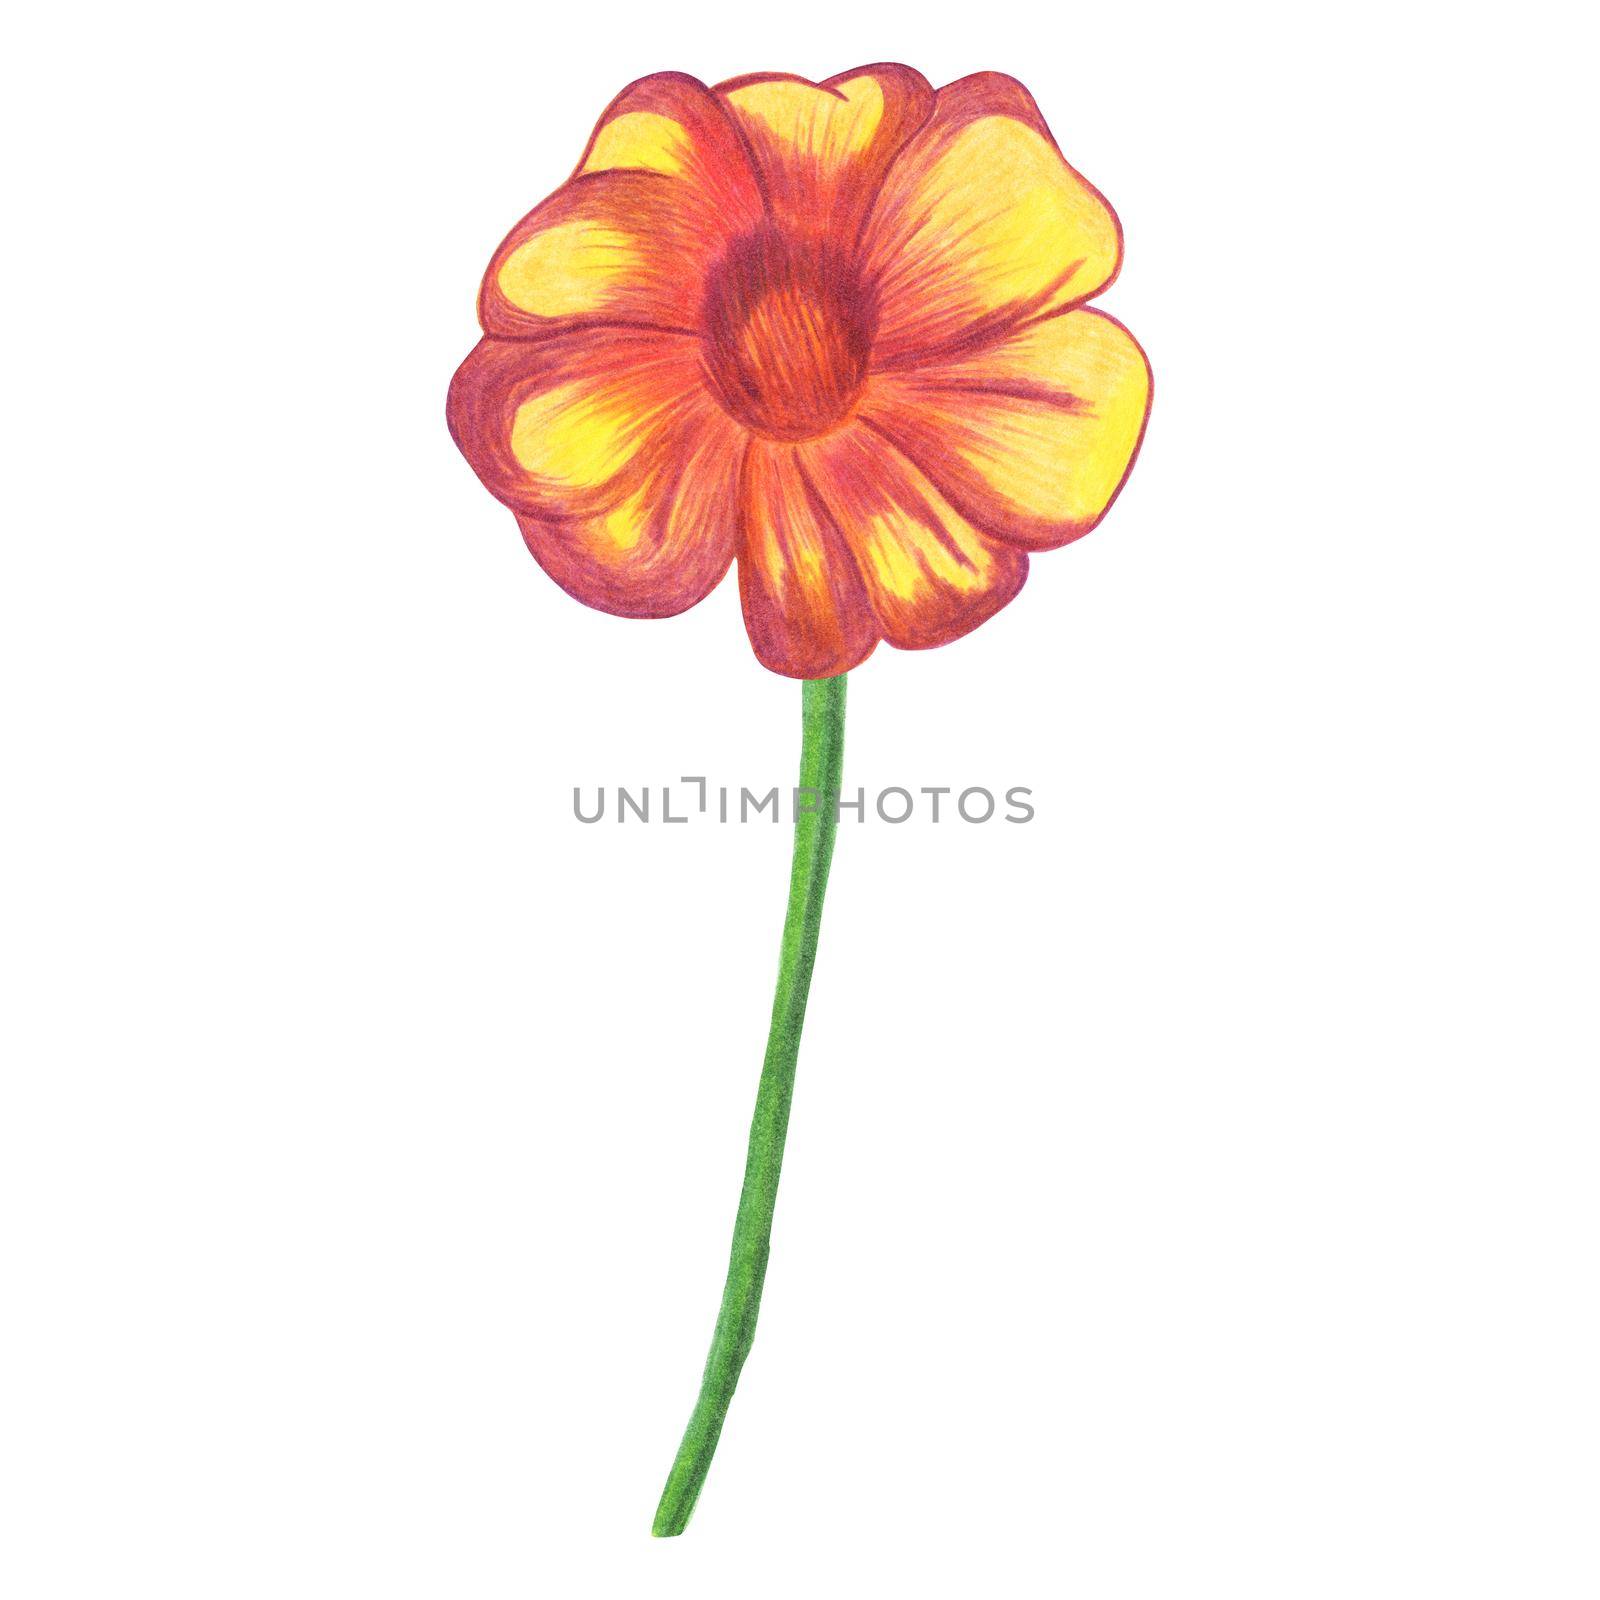 Red Marigold Isolated on White Background. Marigold Flower Element Drawn by Color Pencil.